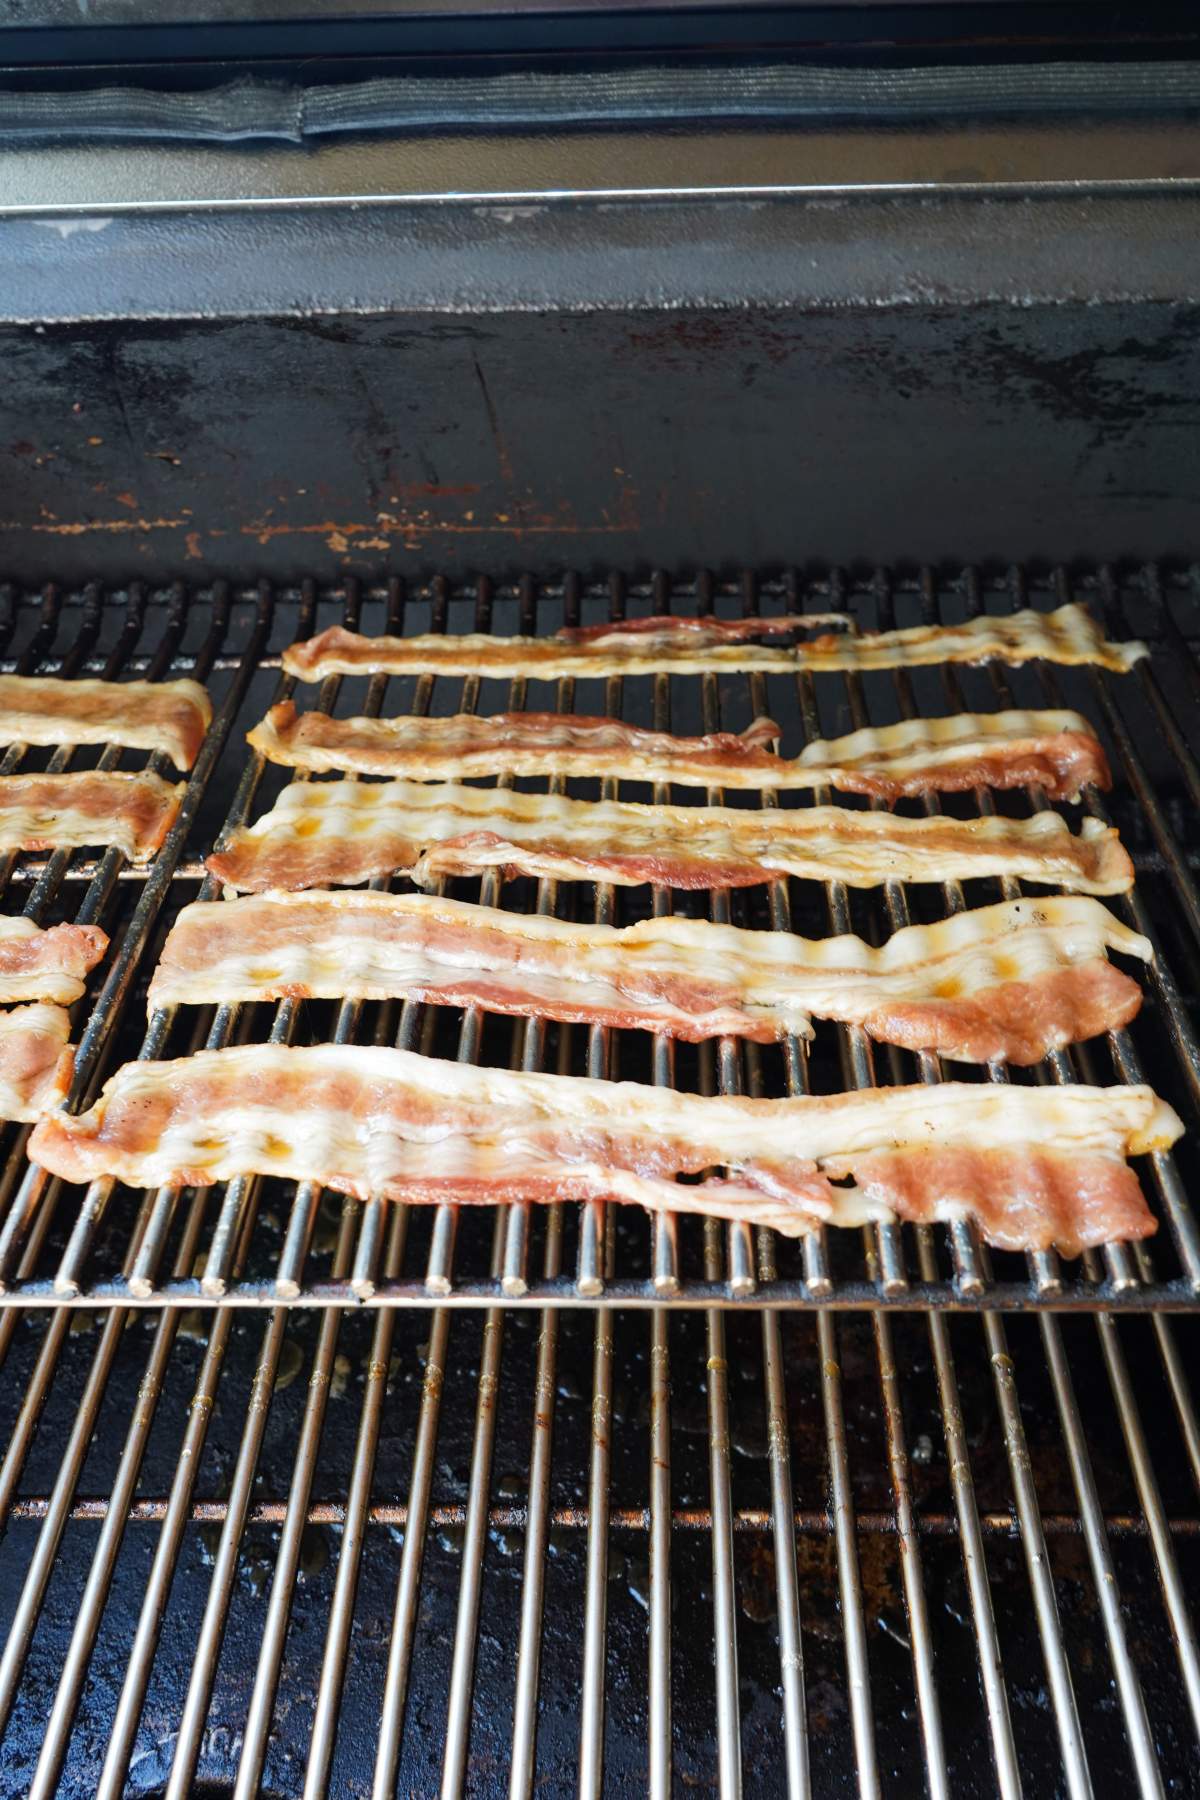 How to Cook Bacon on the Grill